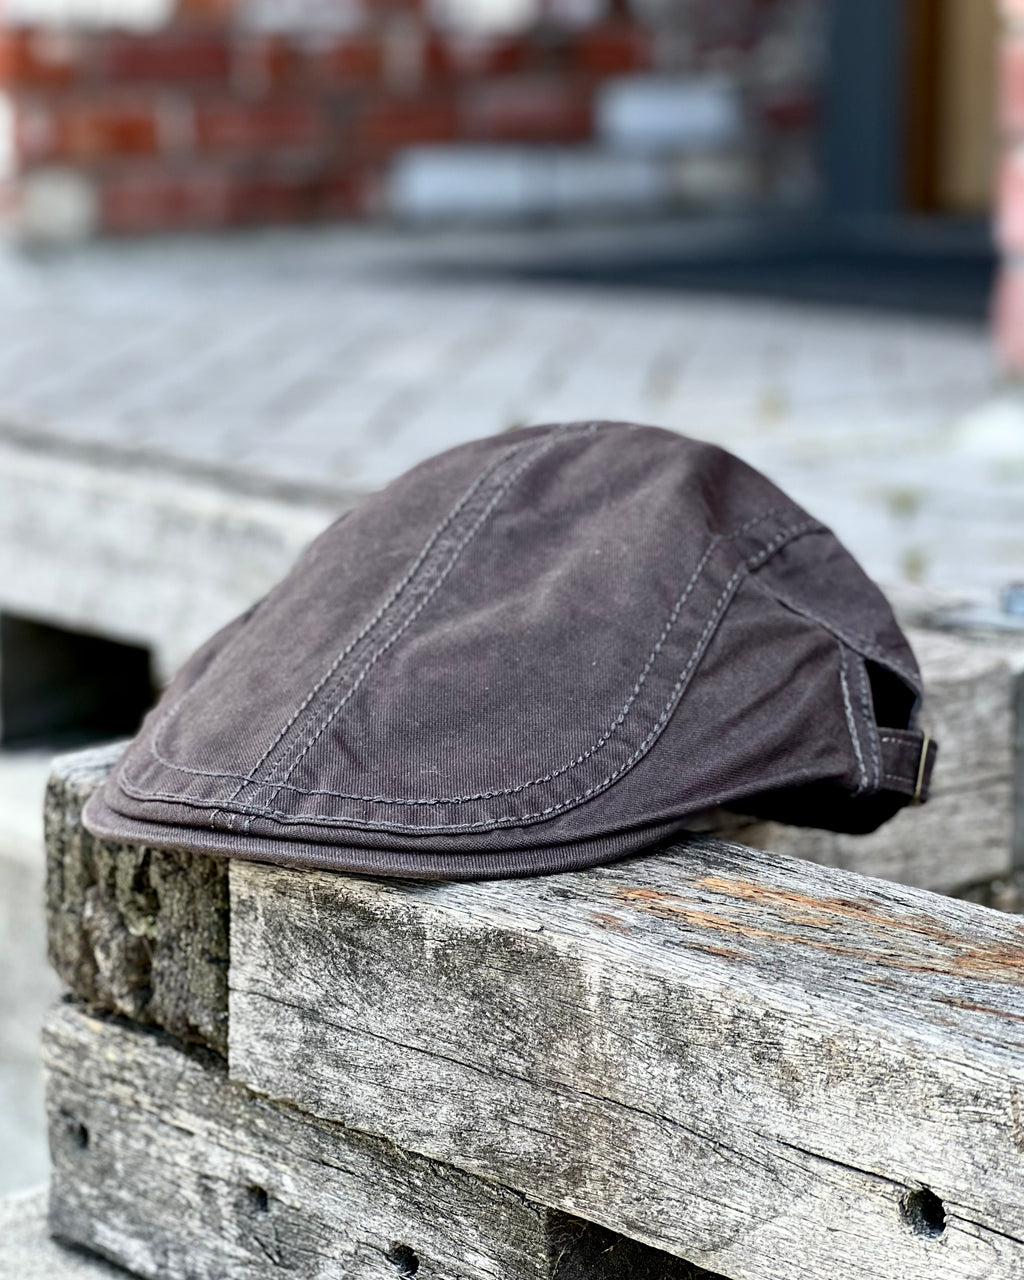 Darby Cheesecutter Cap - pure cotton - mid-grey - by Electric Pukeko